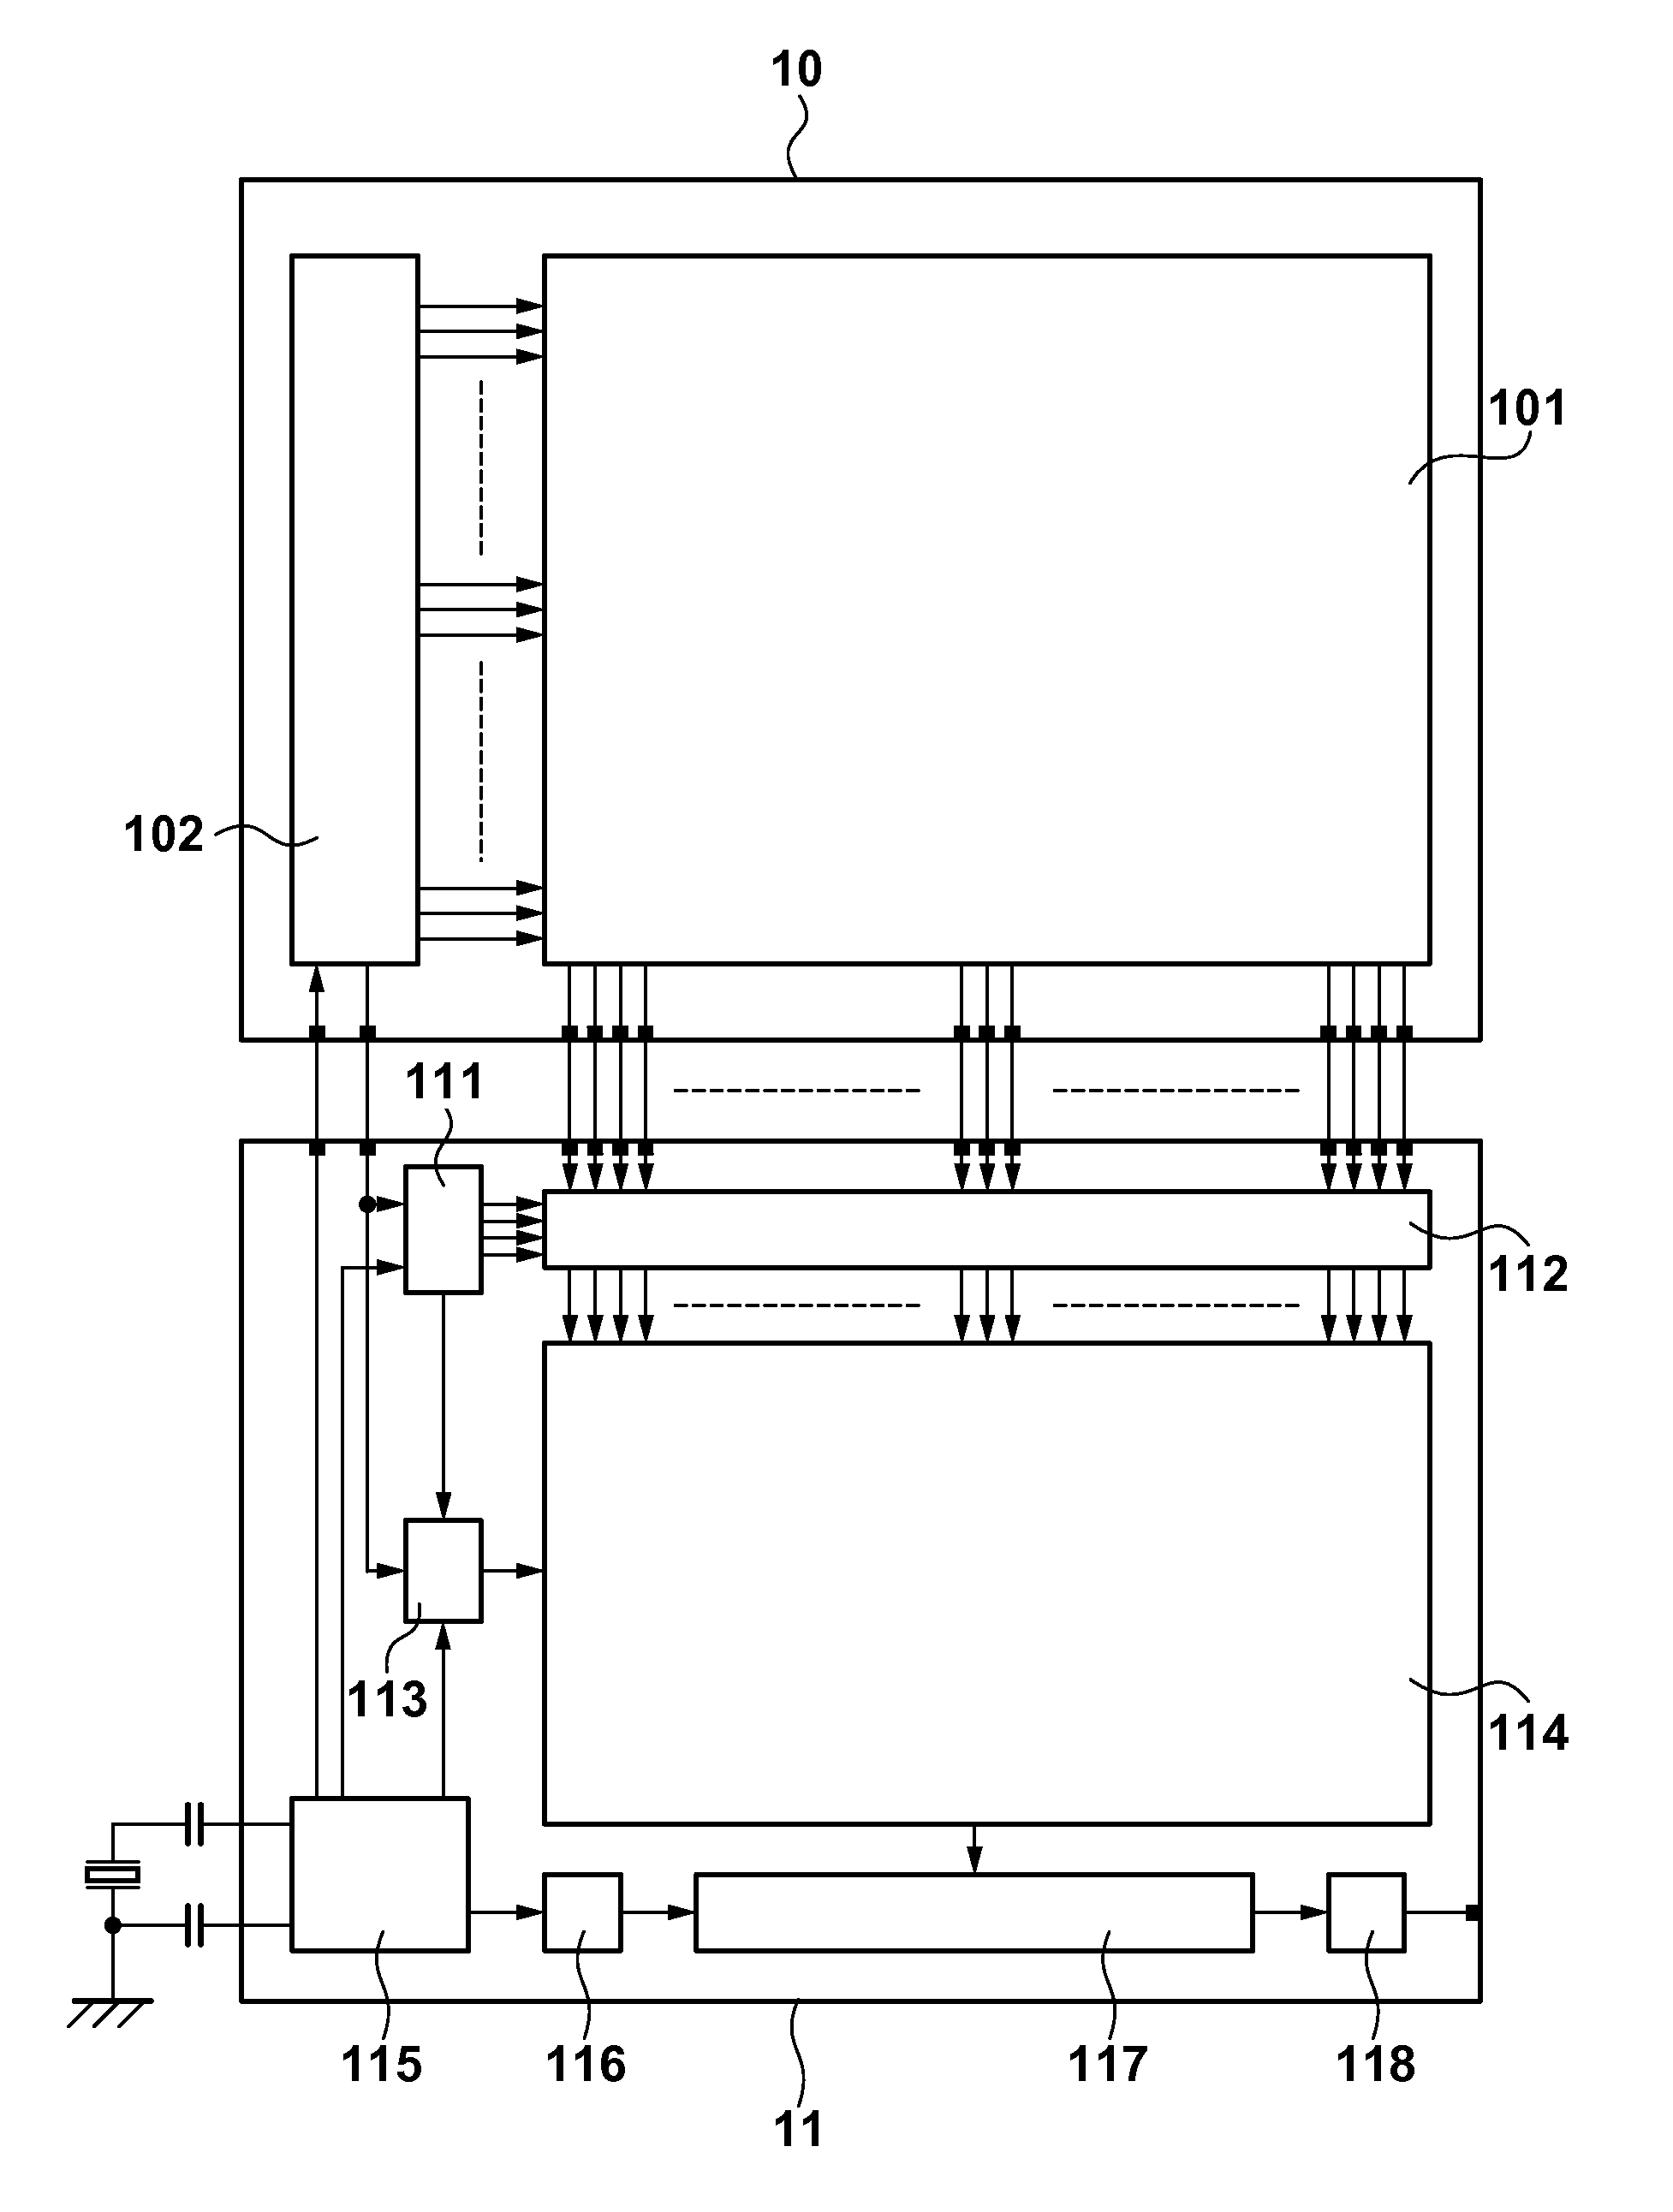 Solid-state image sensor, method of controlling the same, electronic device, and storage medium